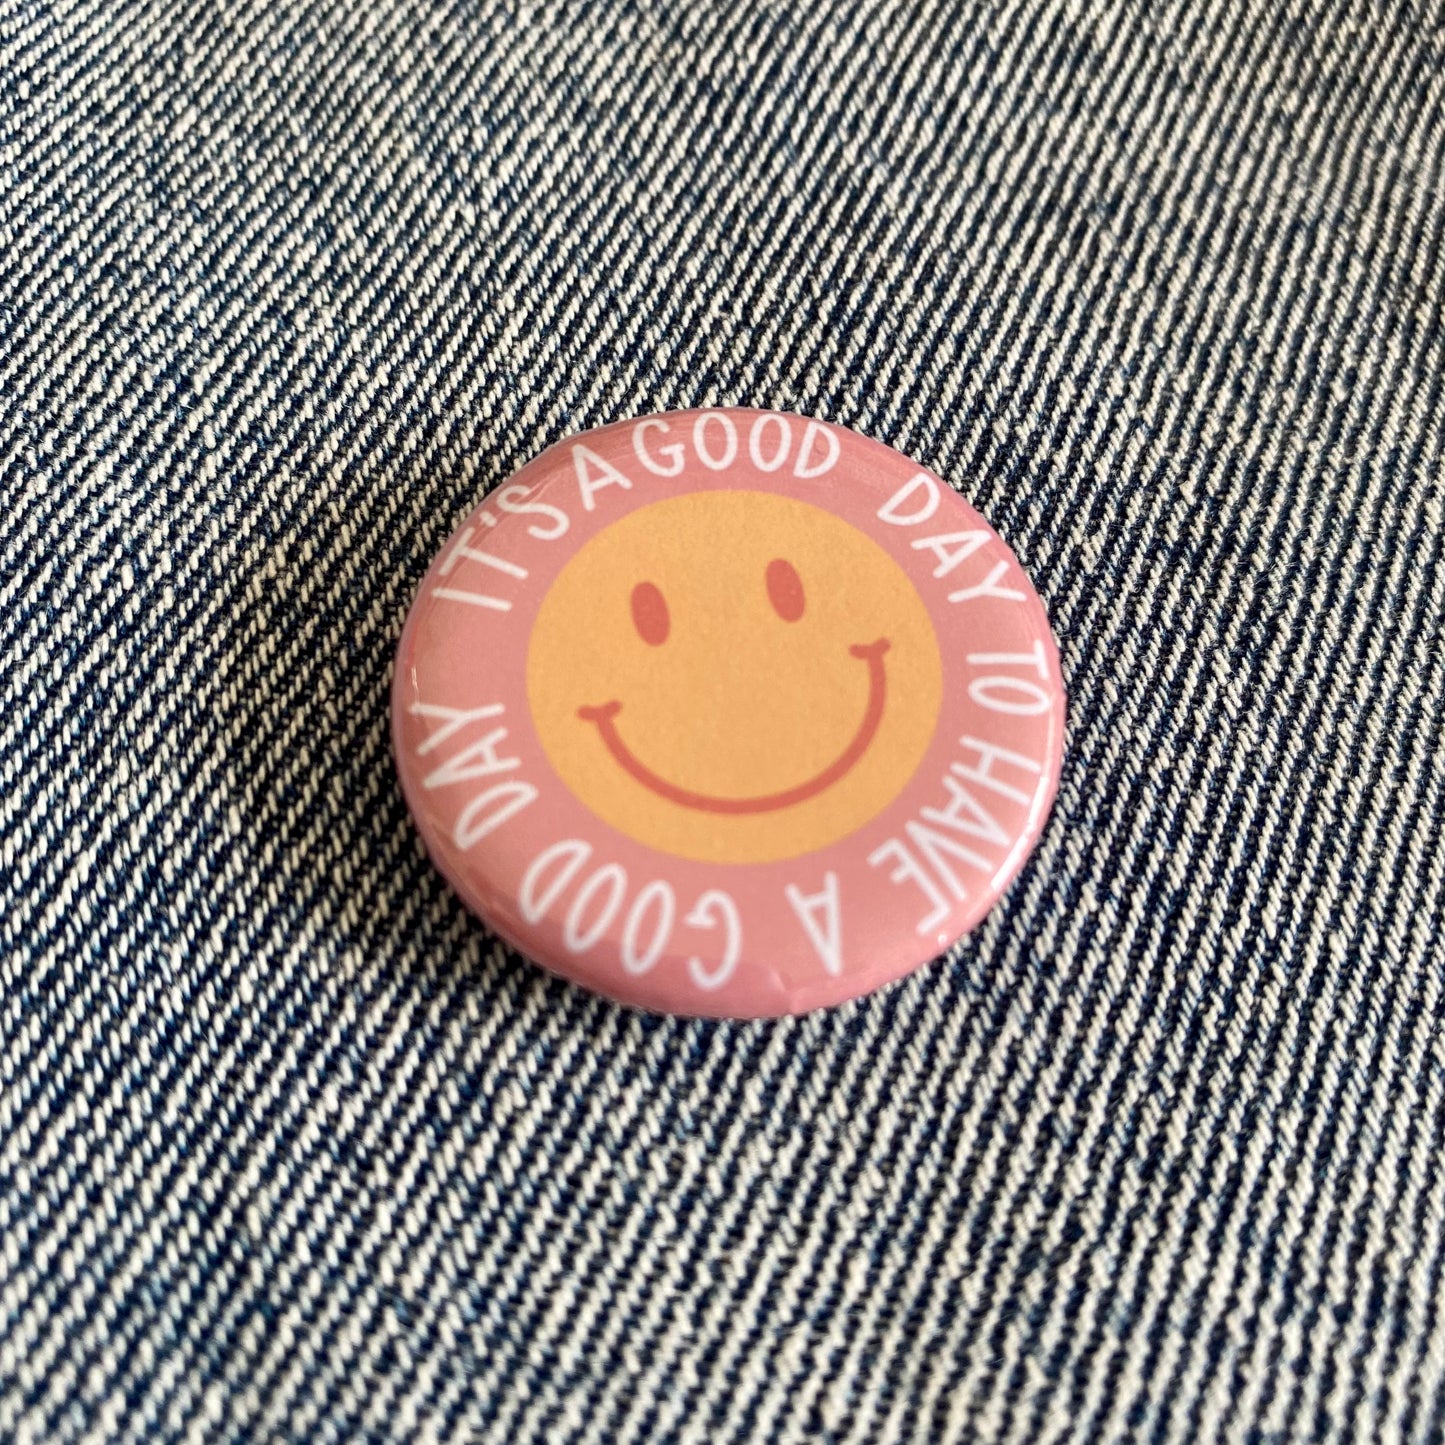 Good Day | Pin Badge Button